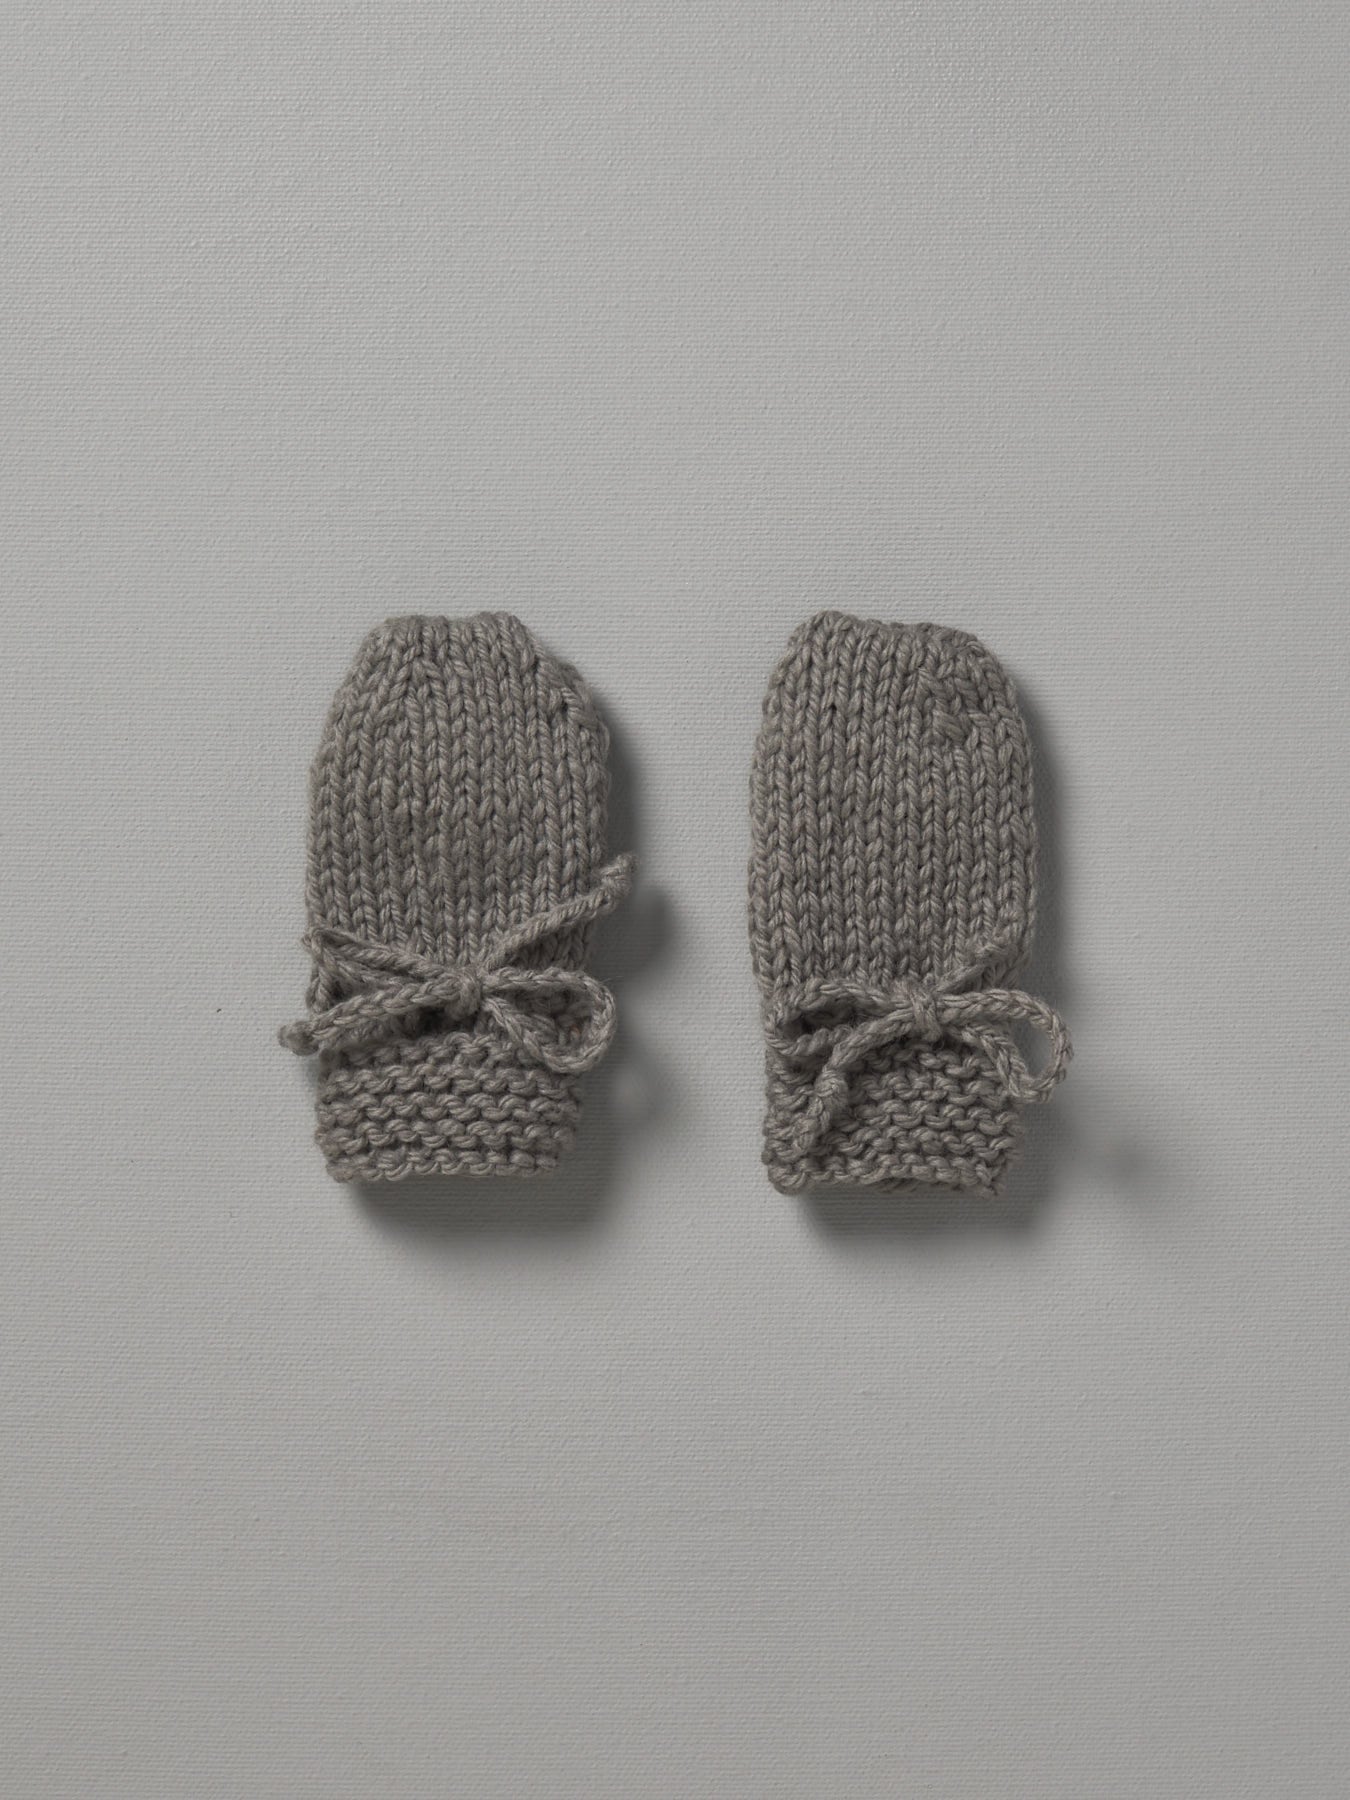 Two grey Weebits Hand Knitted Mittens on a white surface.